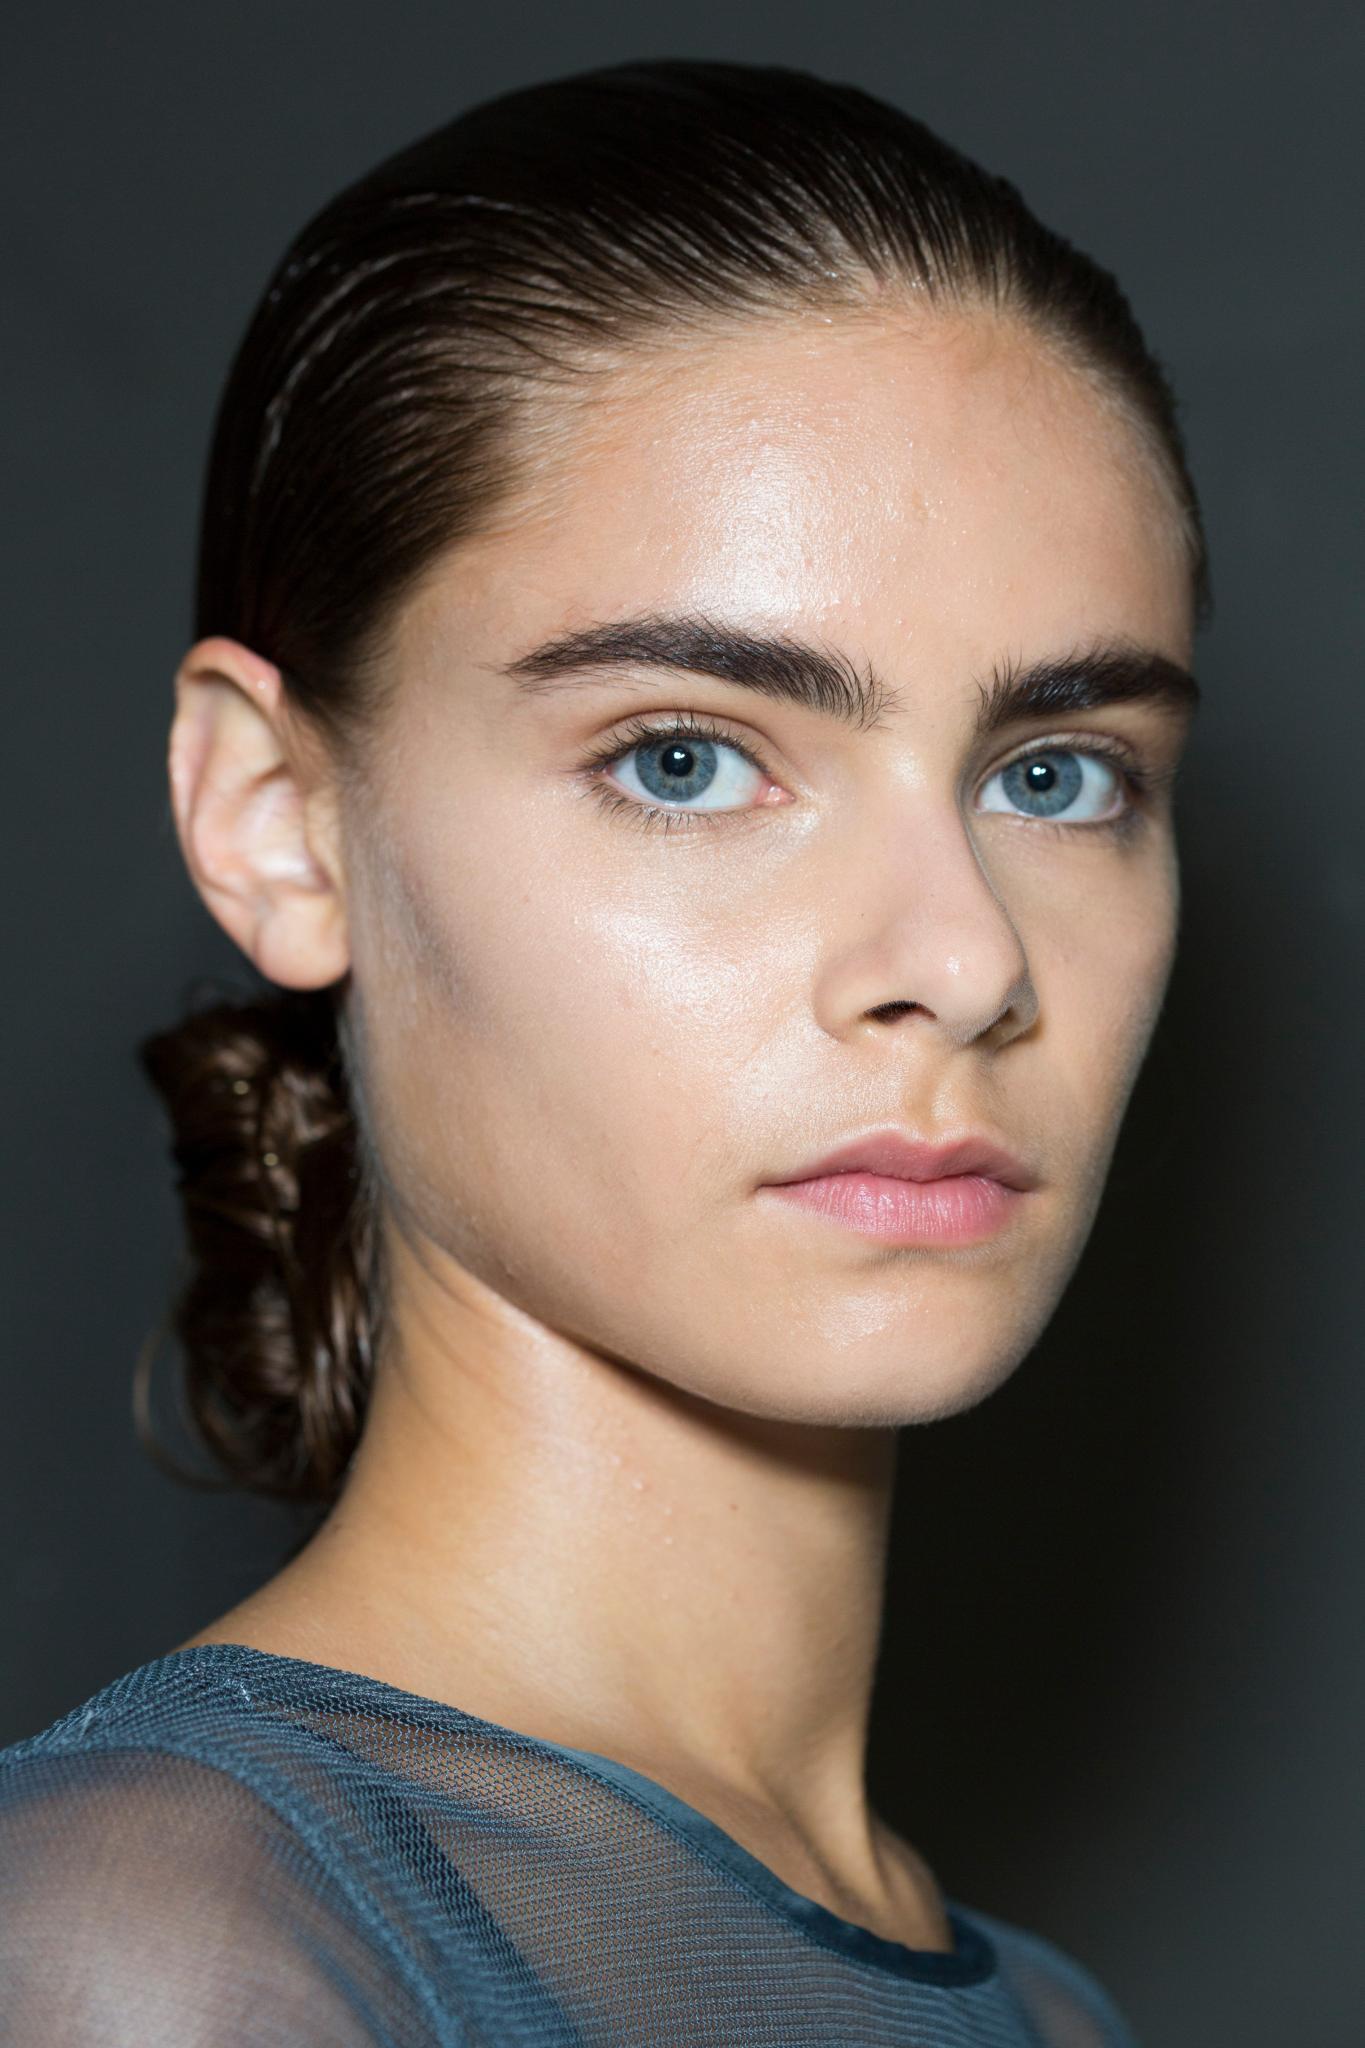 Wet Hairstyles Are *Still* Trending! Get The Wet and Sleek Low Bun ...